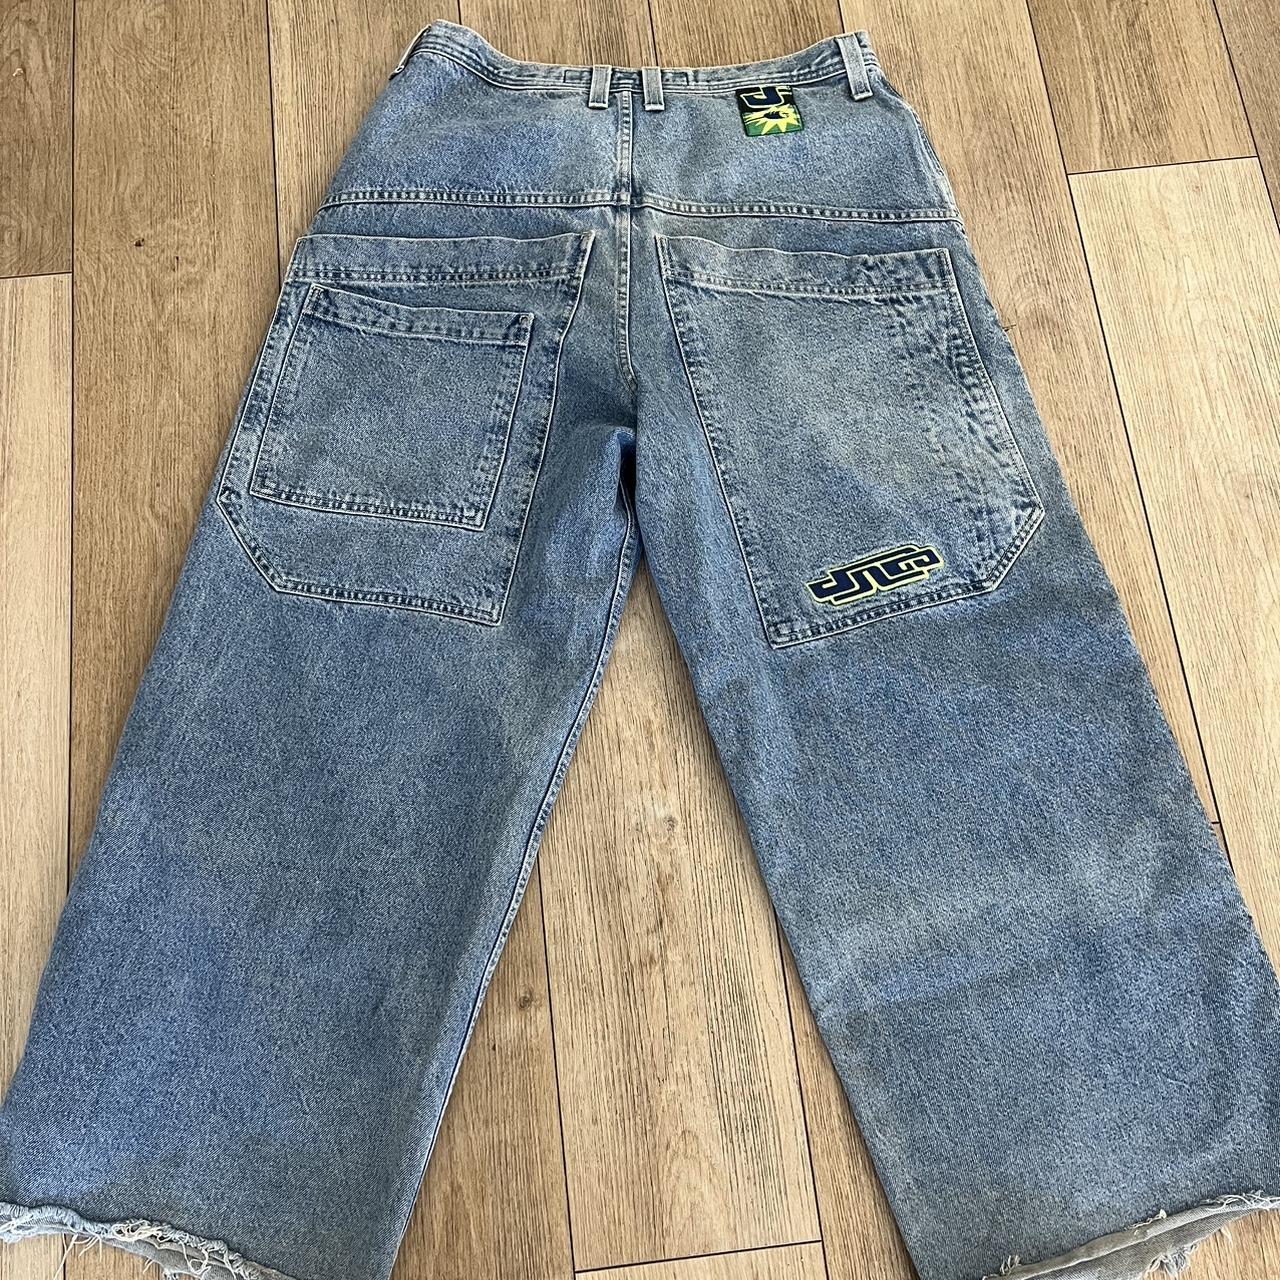 jnco power surges JNCO H/O is 330 hmu w offers NOT... - Depop